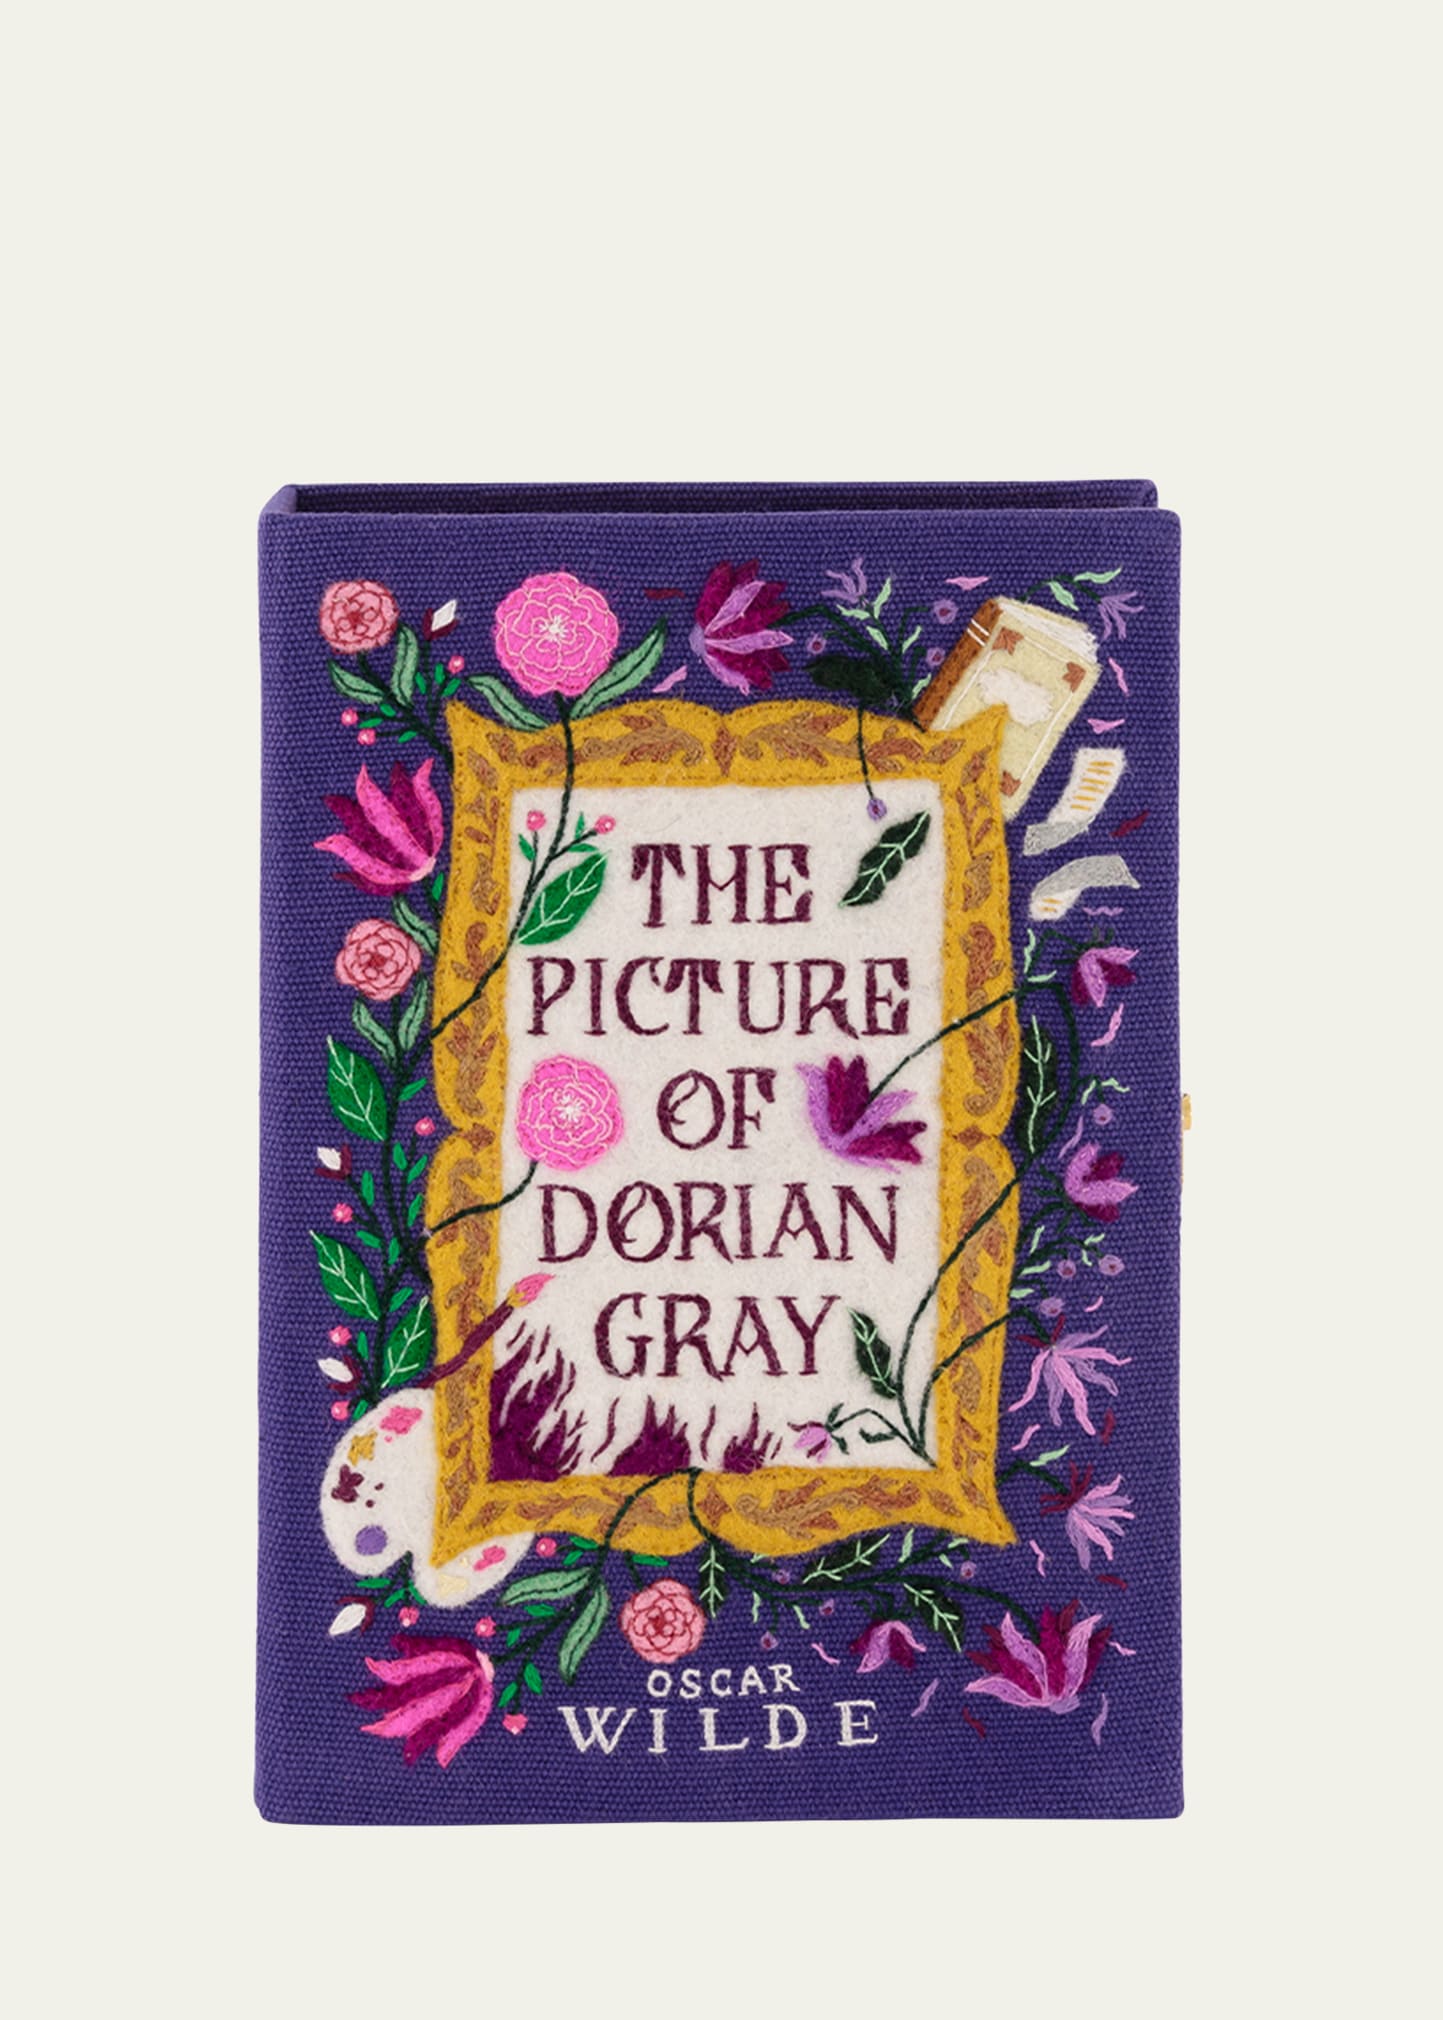 The Picture of Dorian Gray by Oscar Wilde Book Clutch Bag